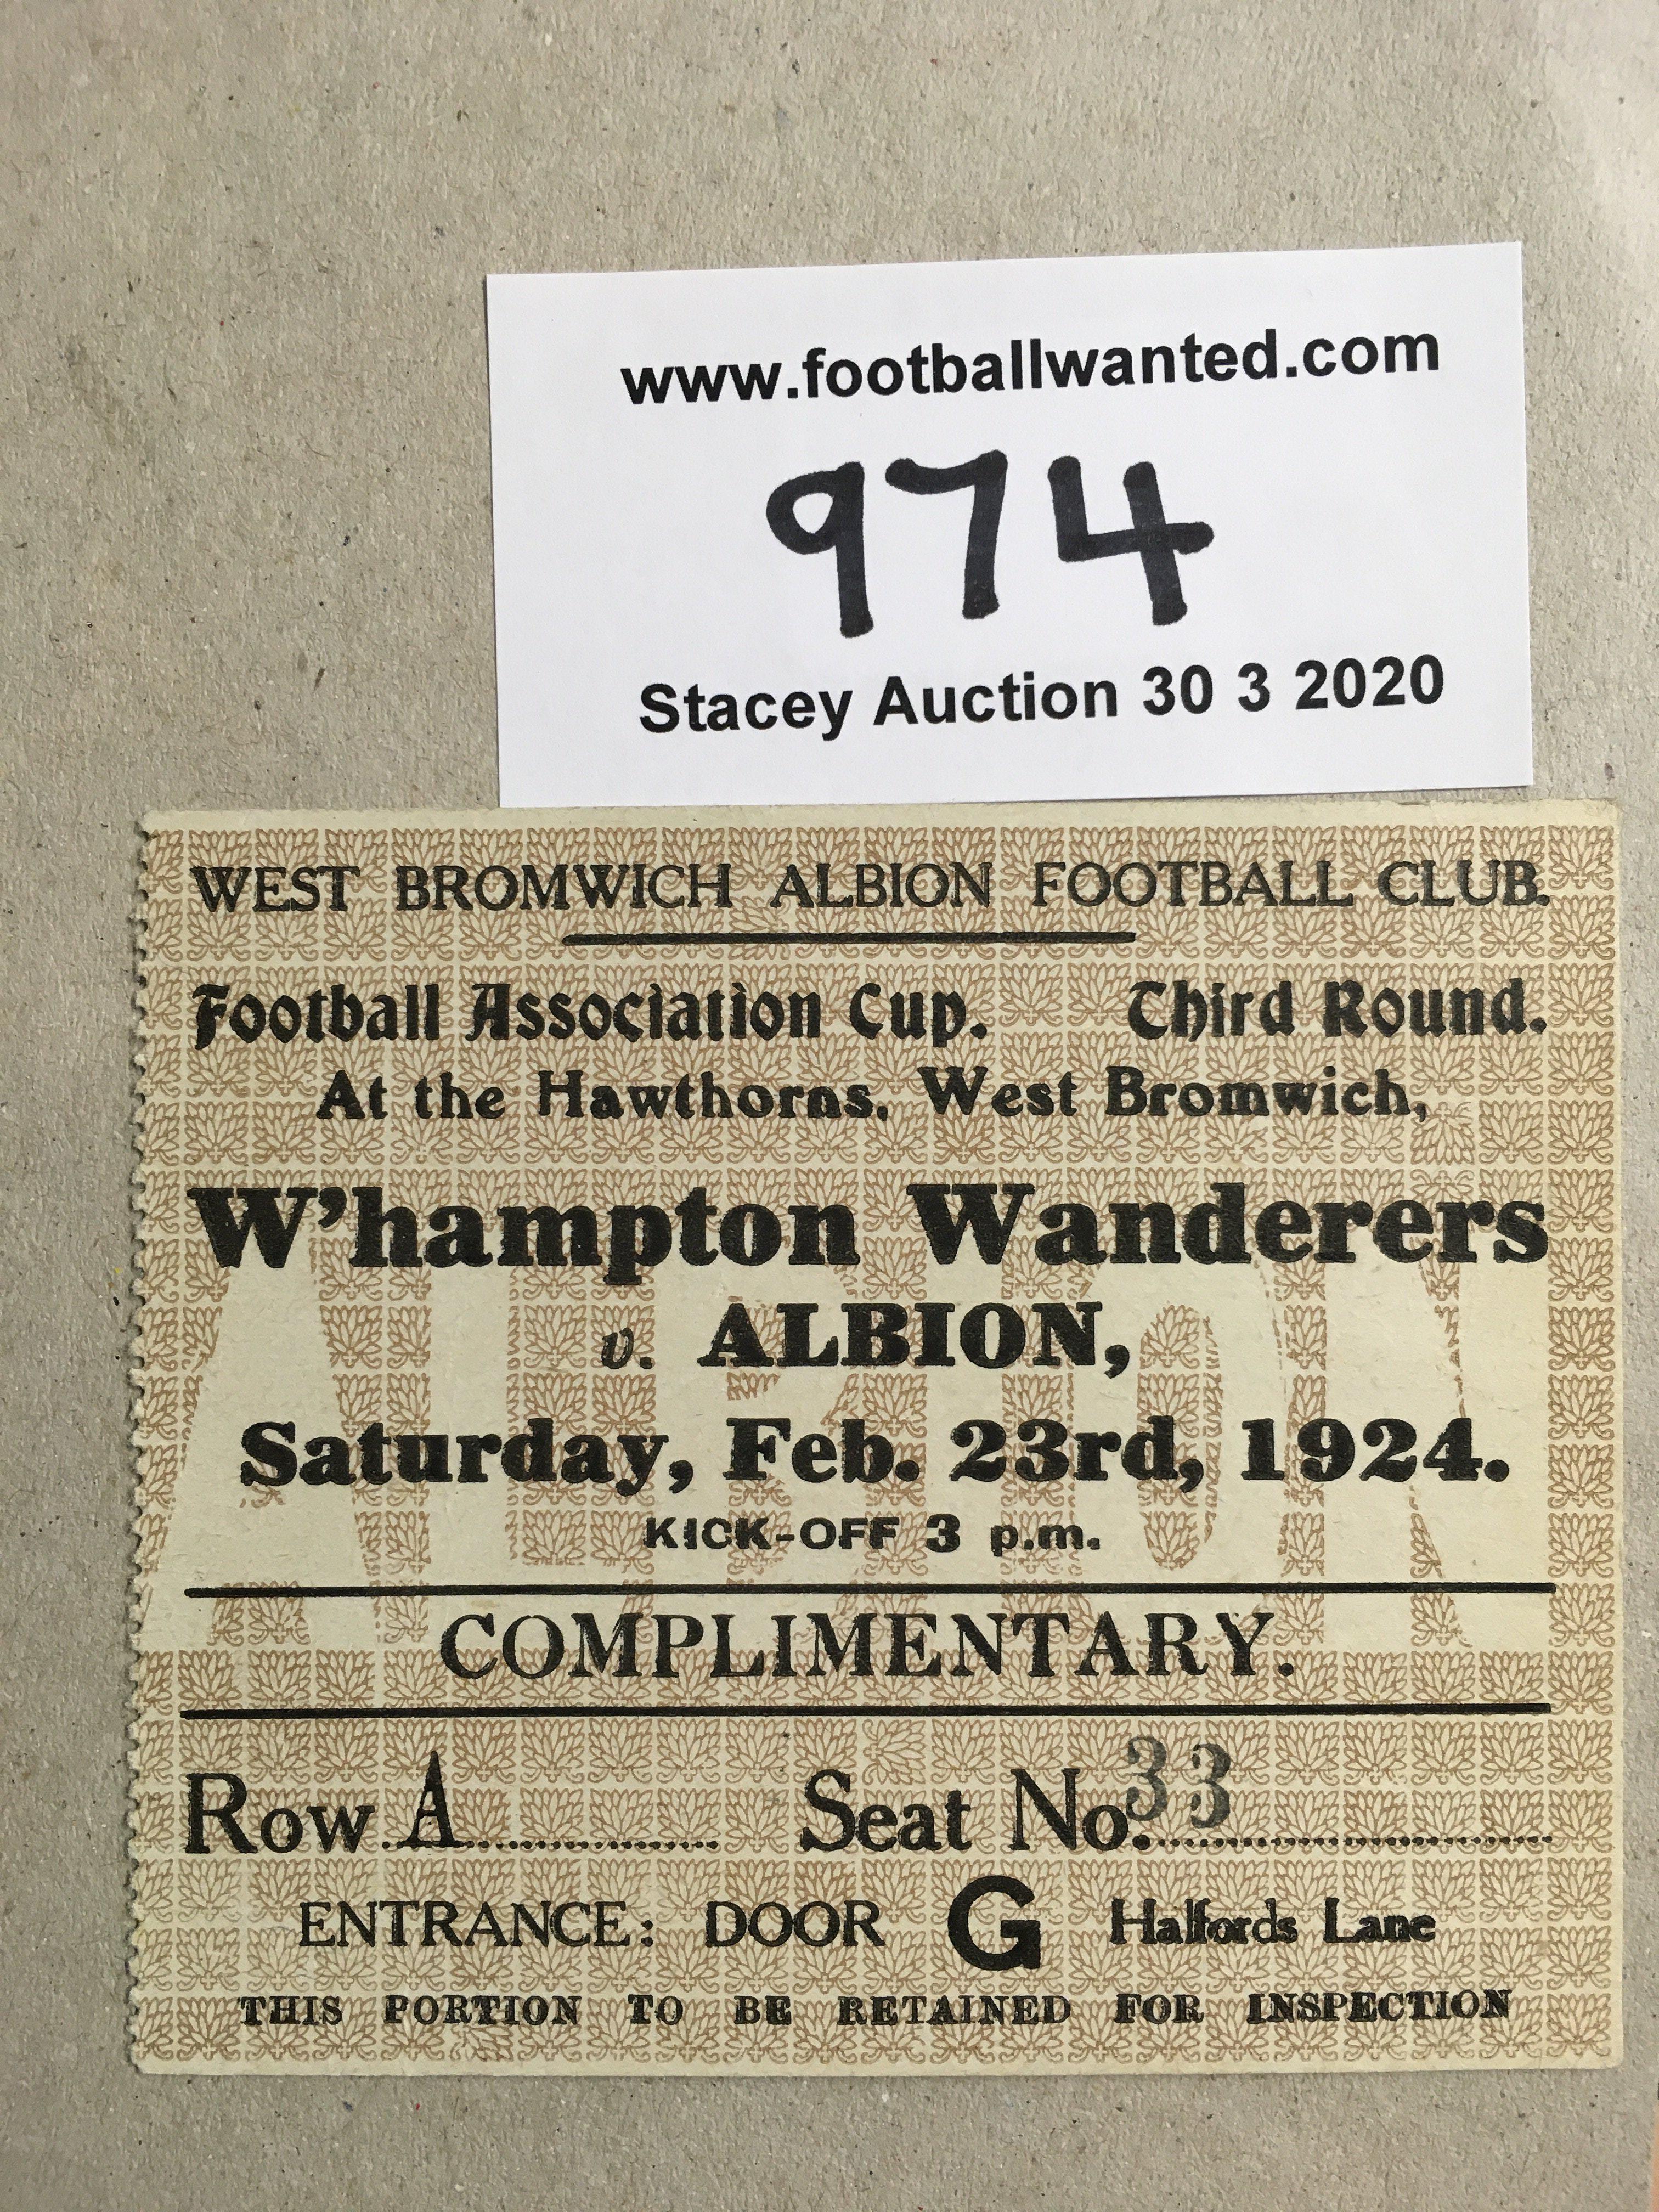 23/24 West Brom v Wolverhampton Wanderers FA Cup Football Ticket: Dated 23 2 1924 in excellent